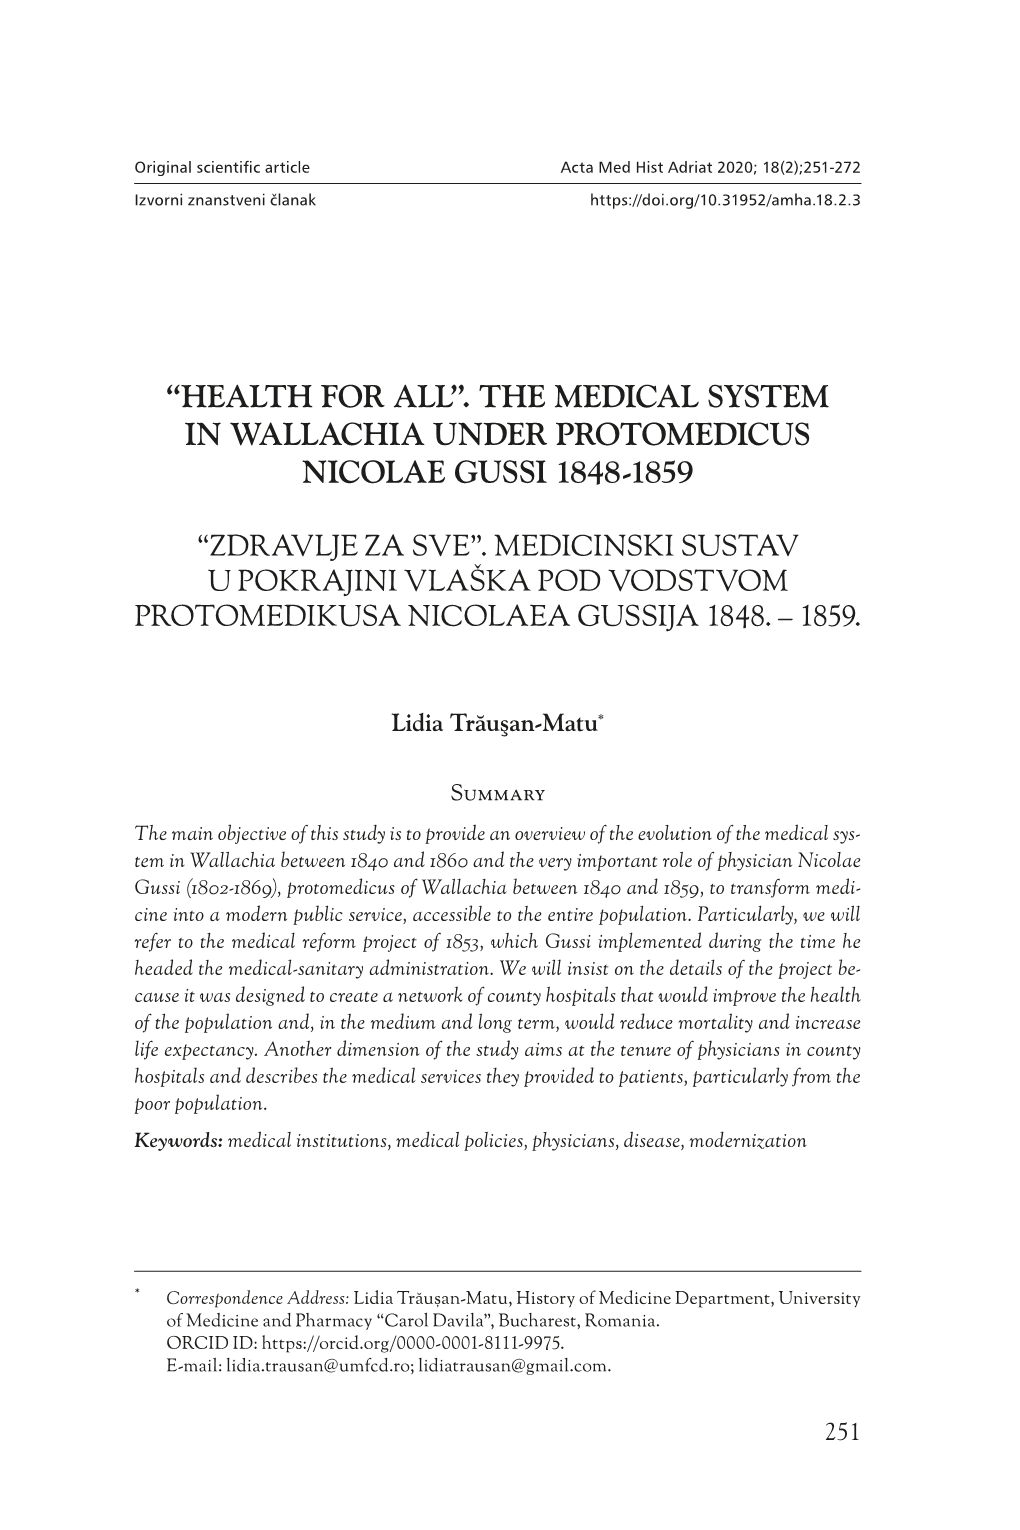 The Medical System in Wallachia Under Protomedicus Nicolae Gussi 1848-1859